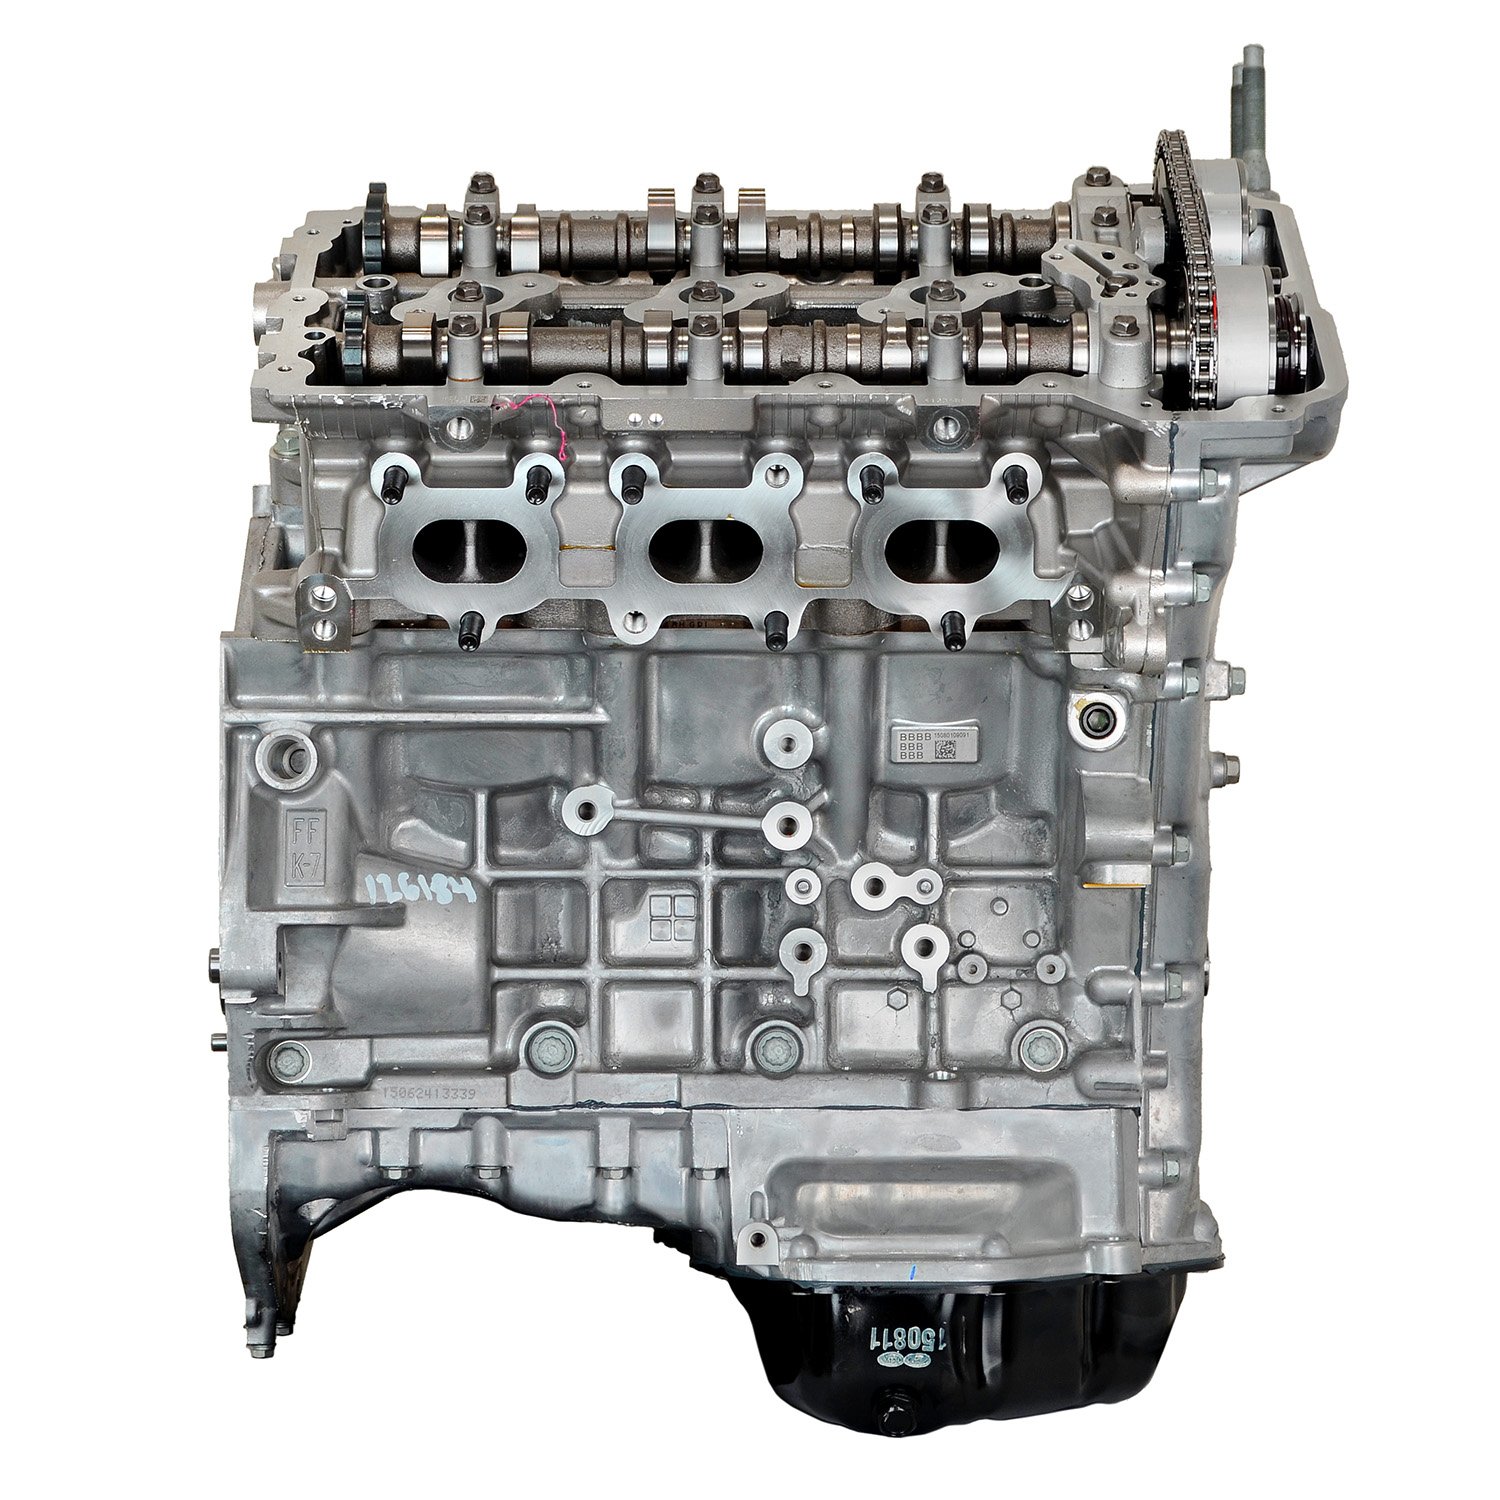 278P Remanufactured Crate Engine Fits Select 2012-2018 Hyundai Models with G6DH 3.3L